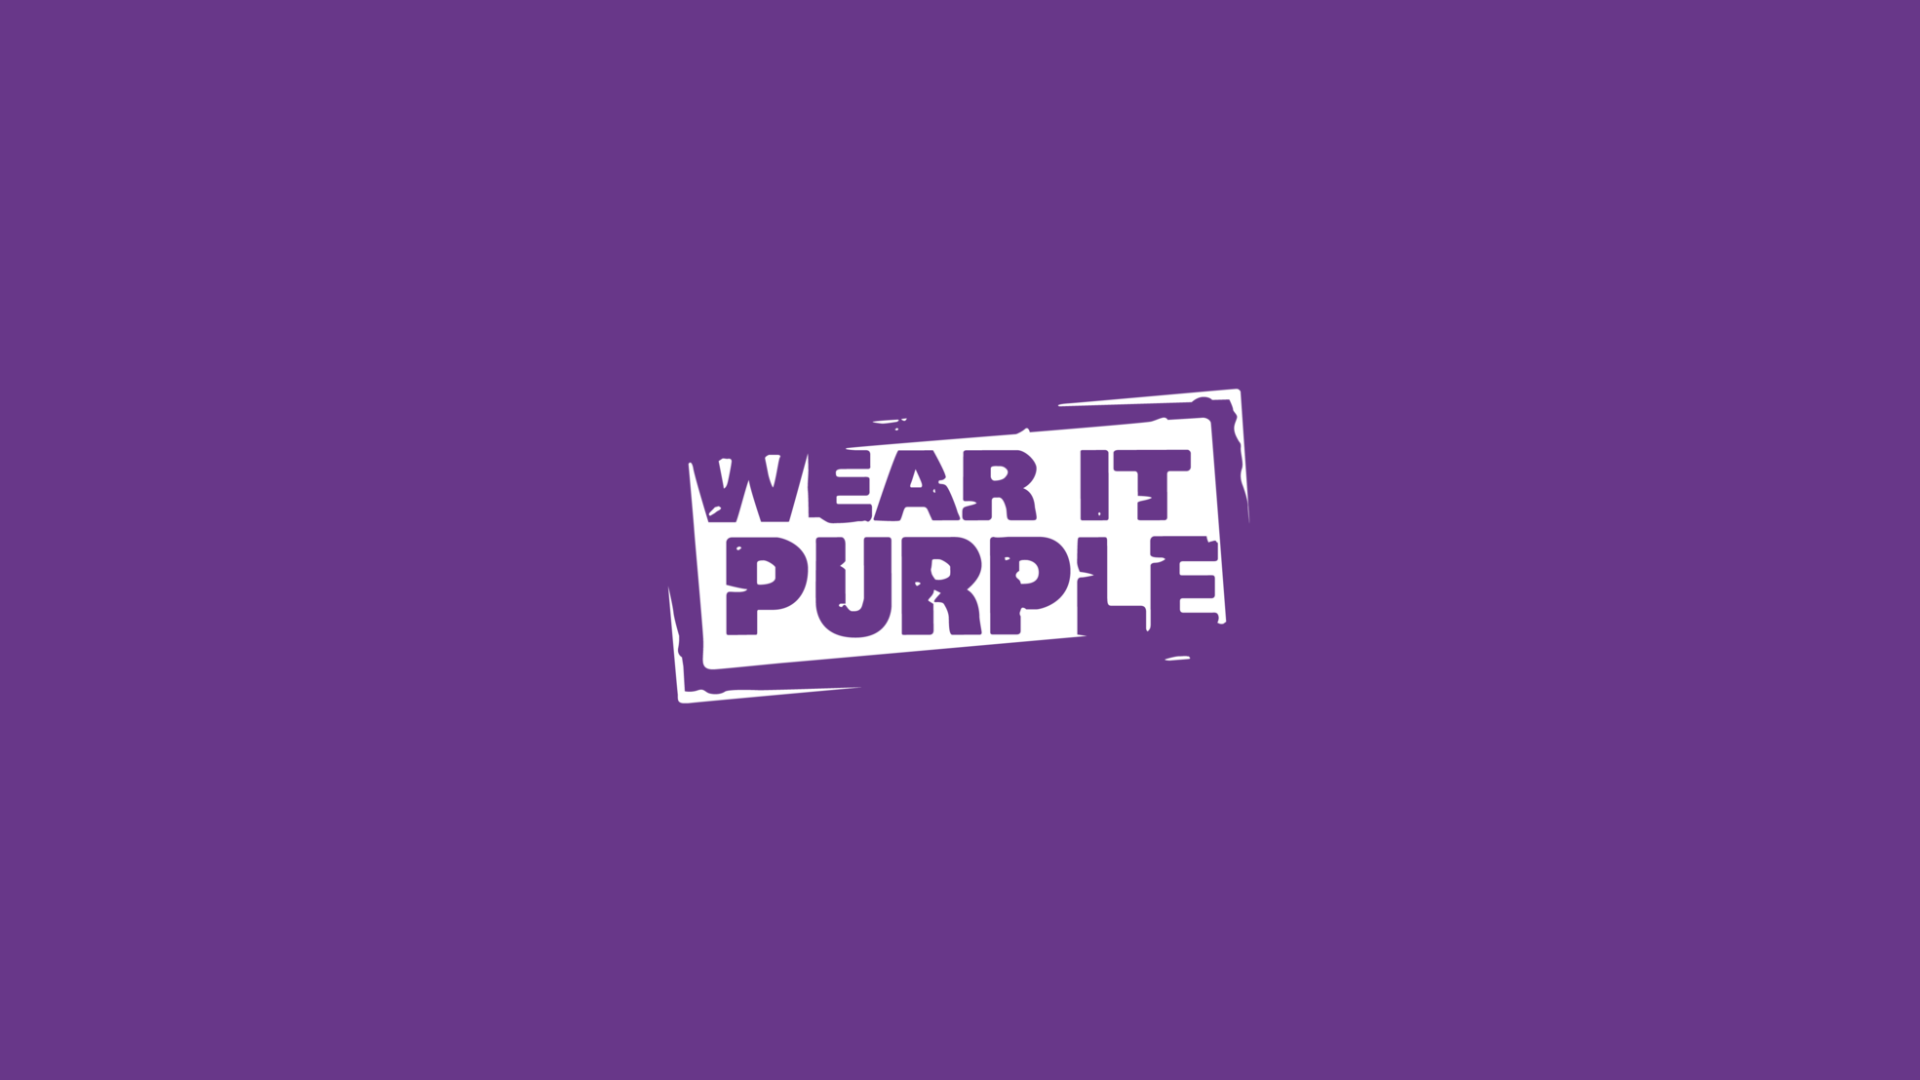 Wear It Purple Day advancing inclusion and awareness for rainbow